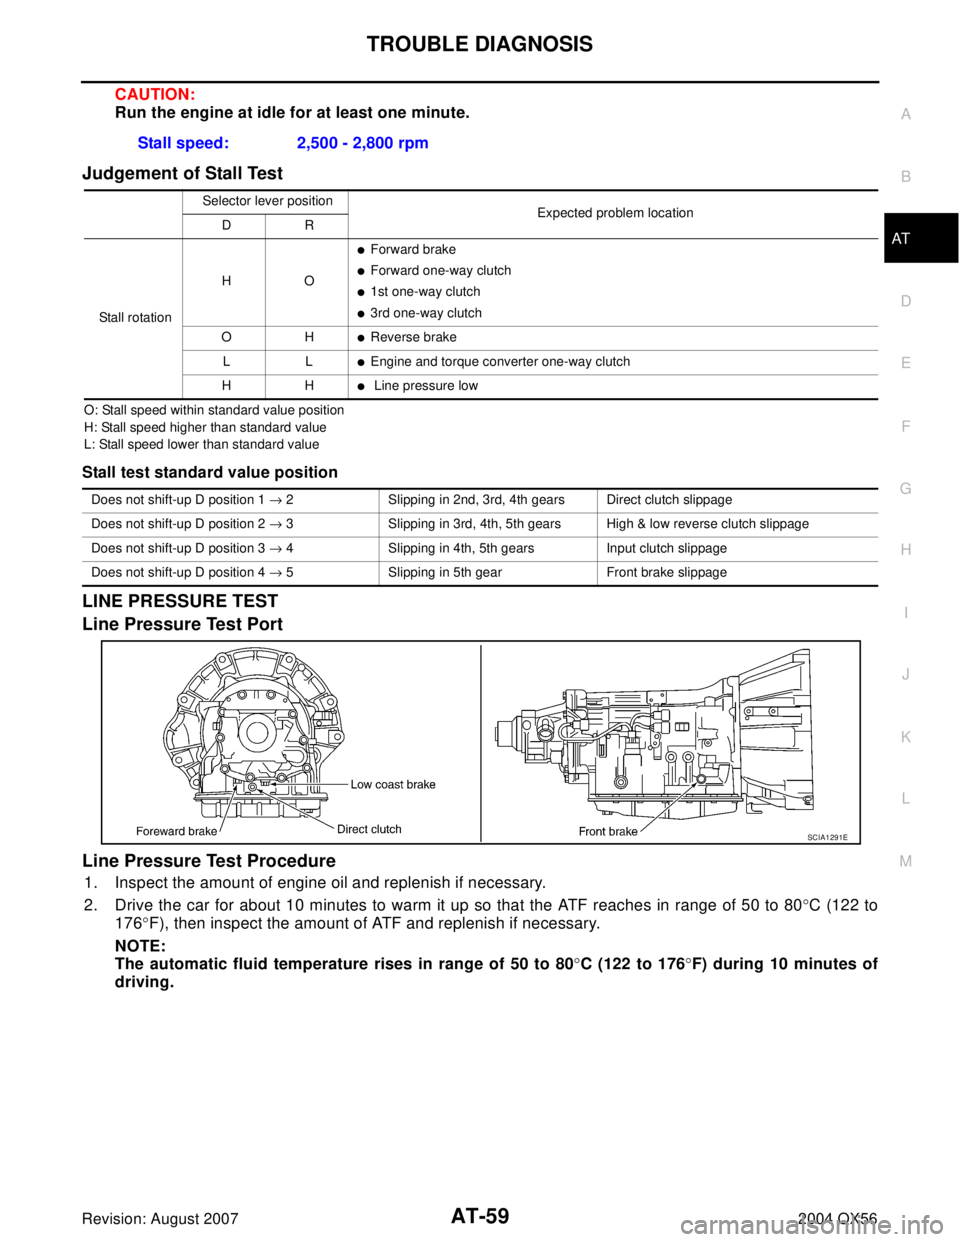 INFINITI QX56 2004  Factory Service Manual TROUBLE DIAGNOSIS
AT-59
D
E
F
G
H
I
J
K
L
MA
B
AT
Revision: August 20072004 QX56
CAUTION:
Run the engine at idle for at least one minute.
Judgement of Stall Test
O: Stall speed within standard value p